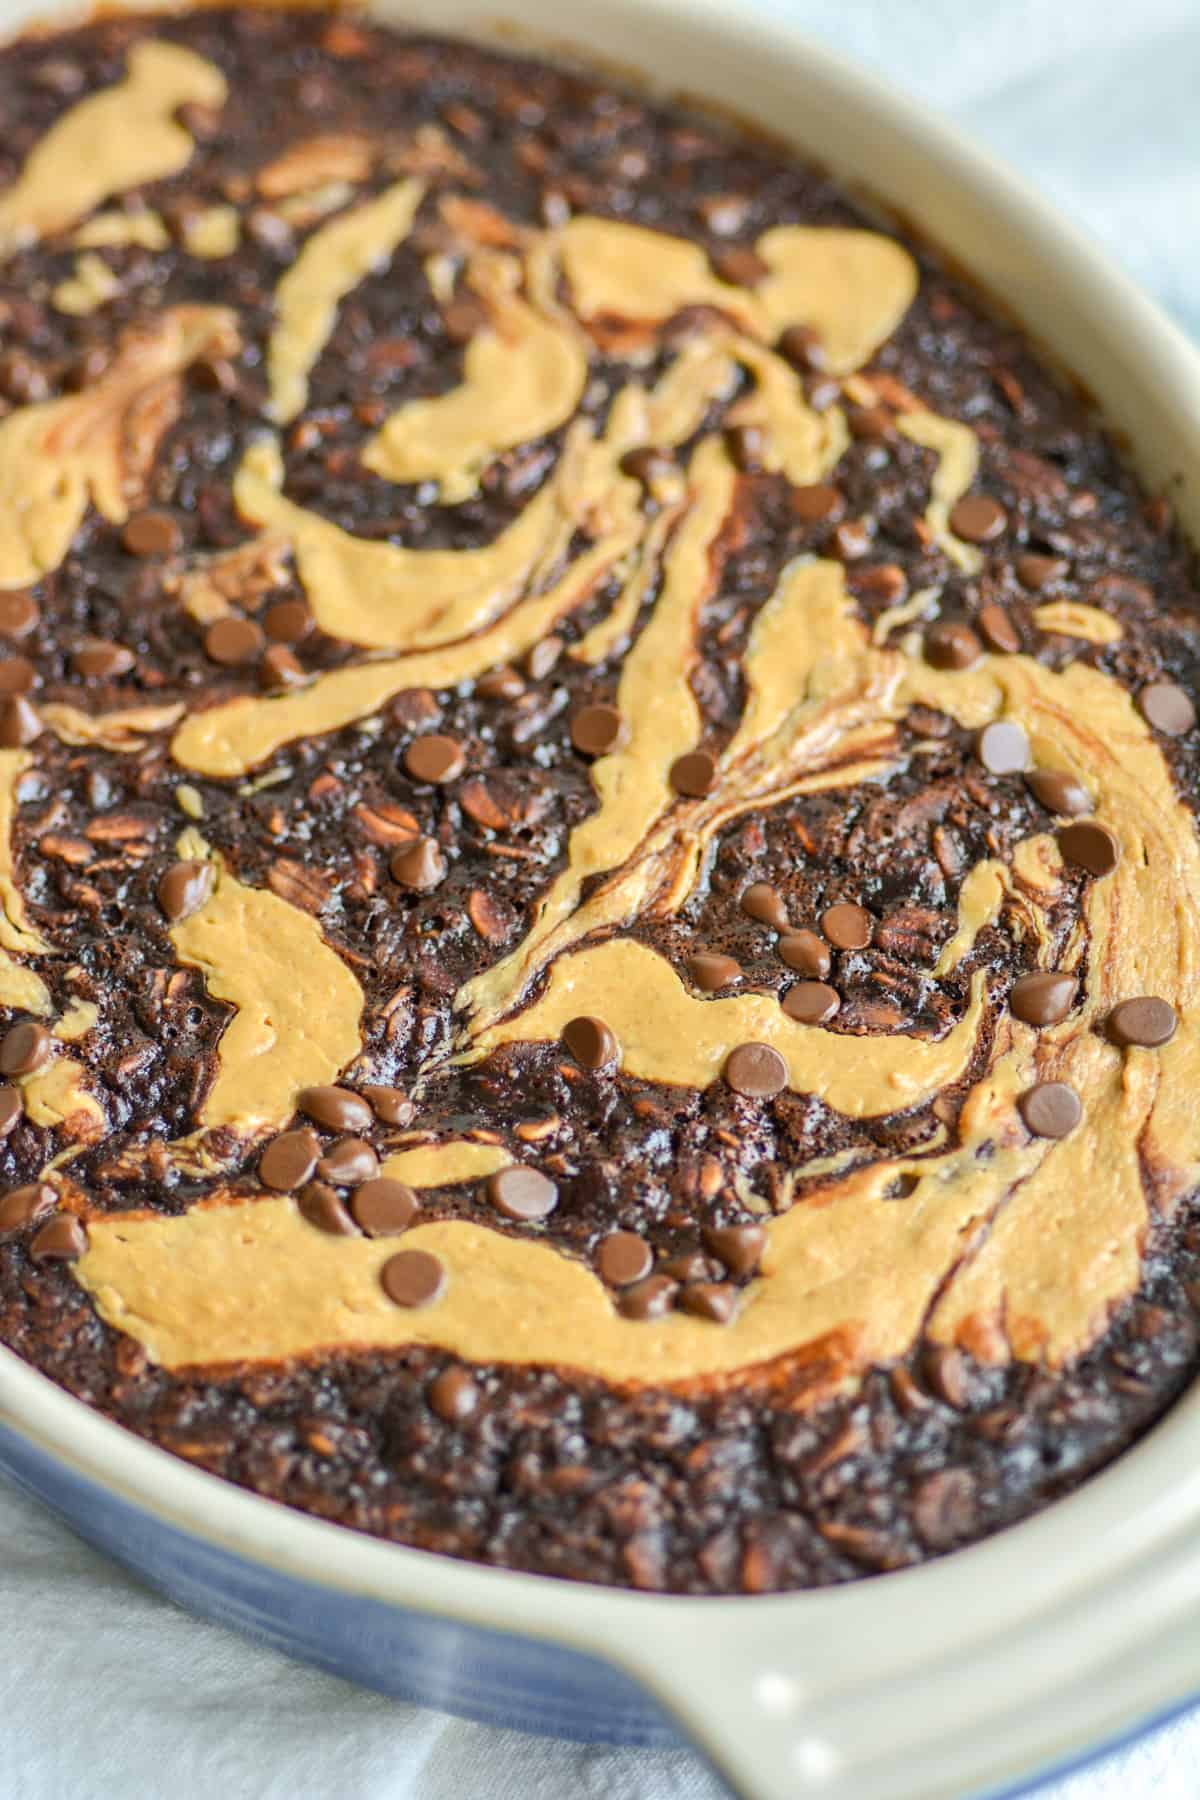 Chocolate Baked Oatmeal with peanut butter swirl in a baking dish on a white cloth.